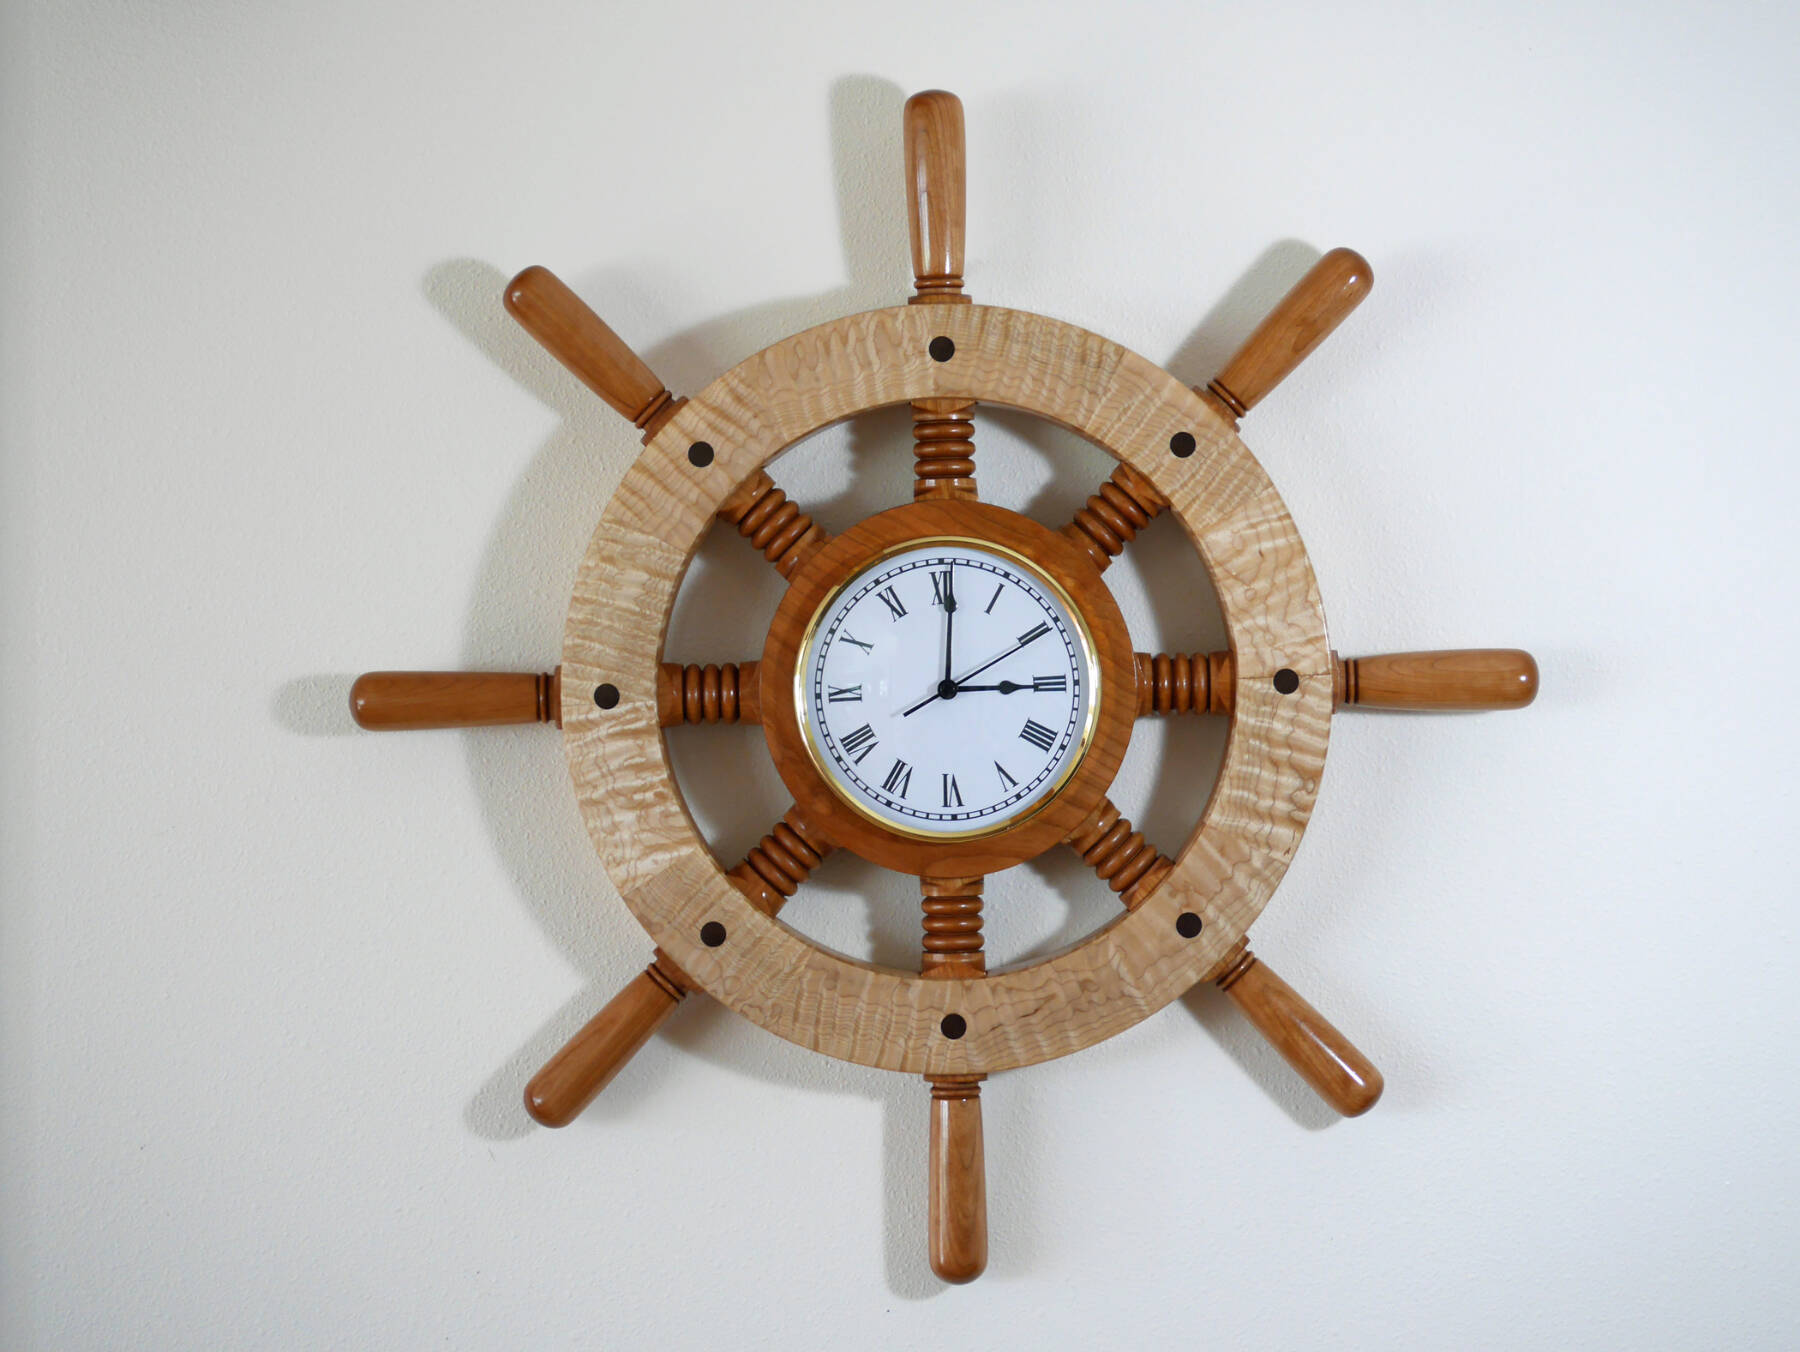 A wooden Ship’s Wheel Clock was created by Homer woodworker Ted Heuer, whose work is available year-round at Ptarmigan Arts, in 2018. Photo by Ted Heuer